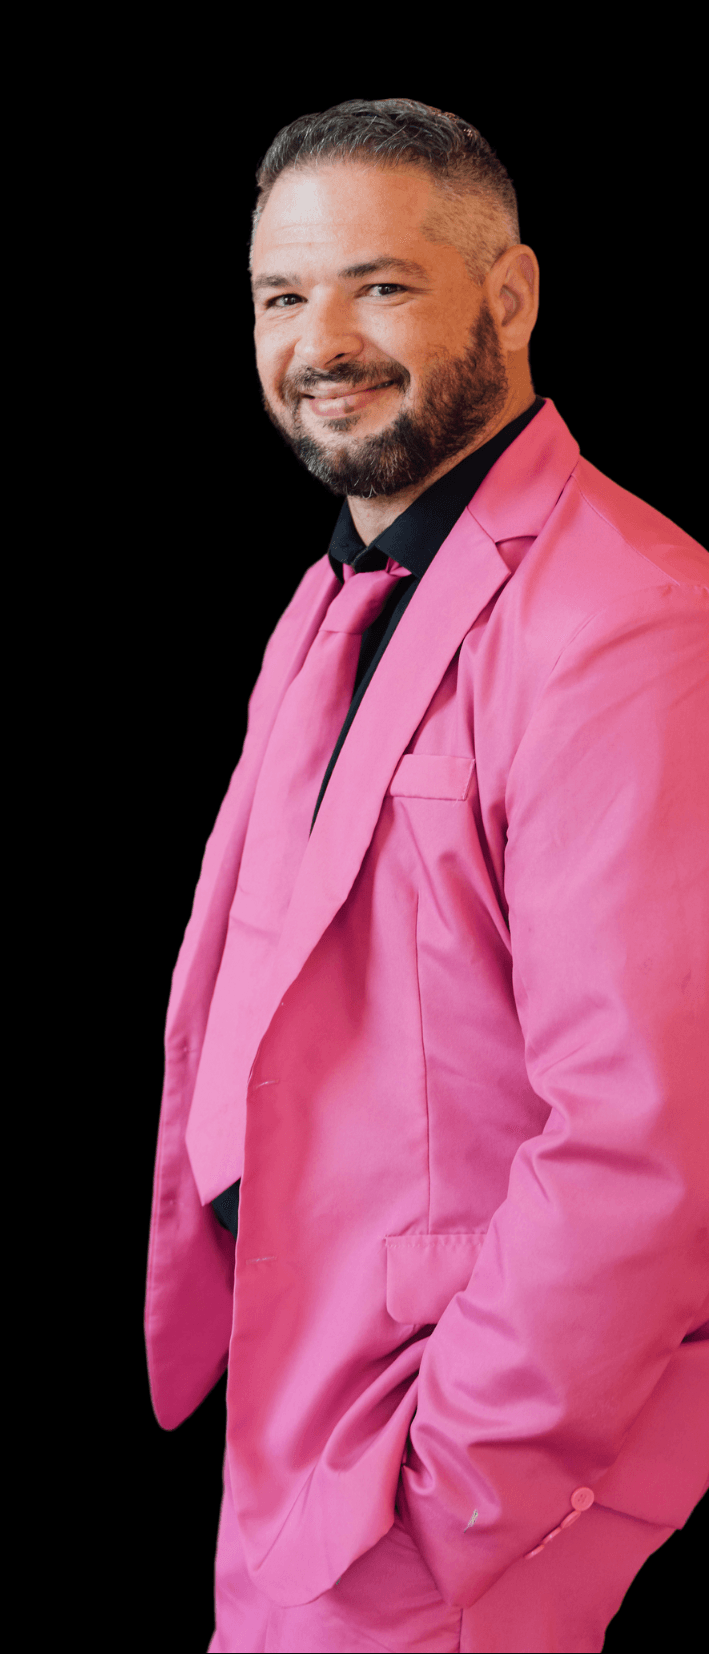 a man in a pink suit and tie is standing with his hands in his pockets .